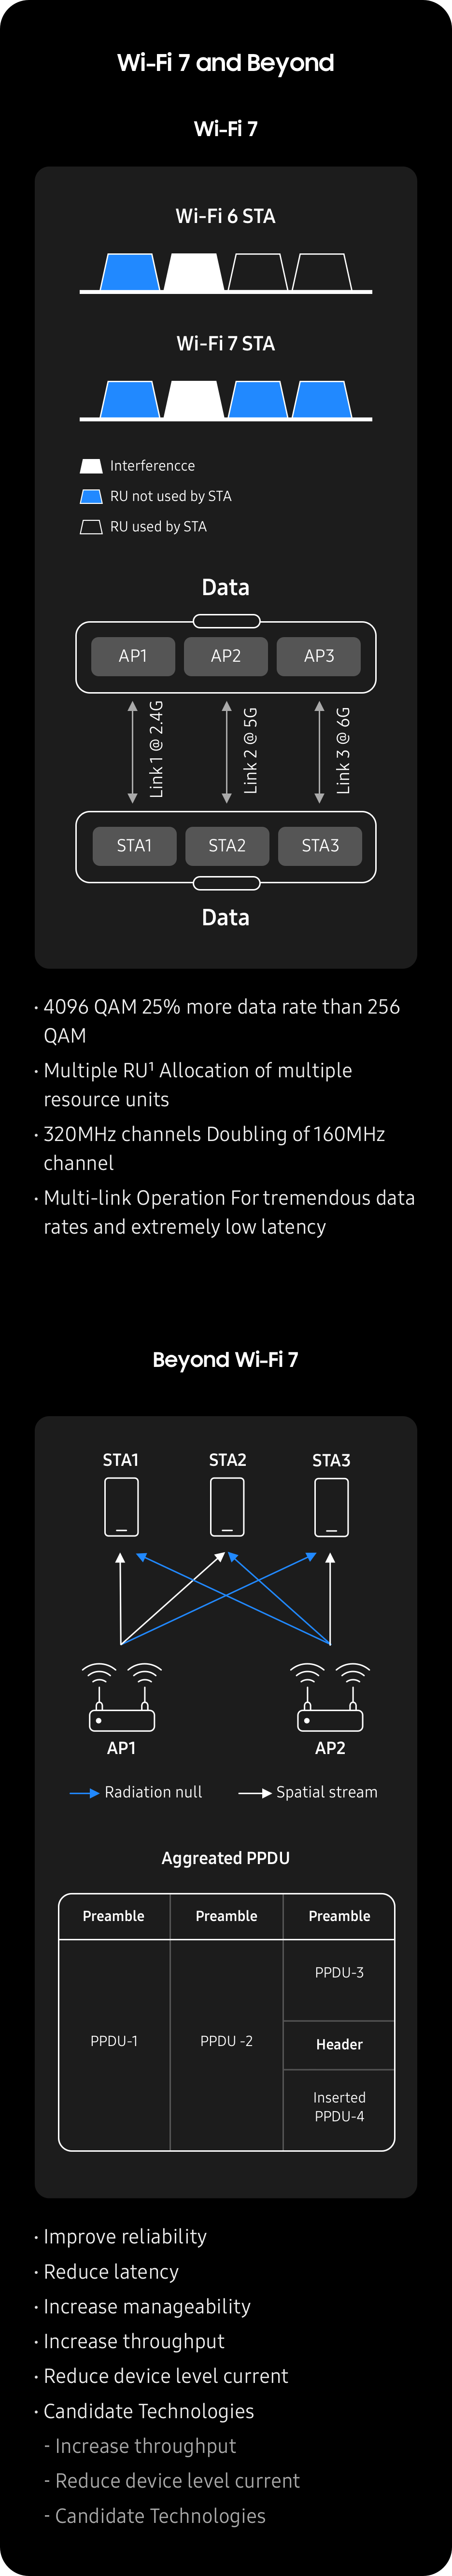 Samsung predicts Wi-Fi 7 and beyond technologies